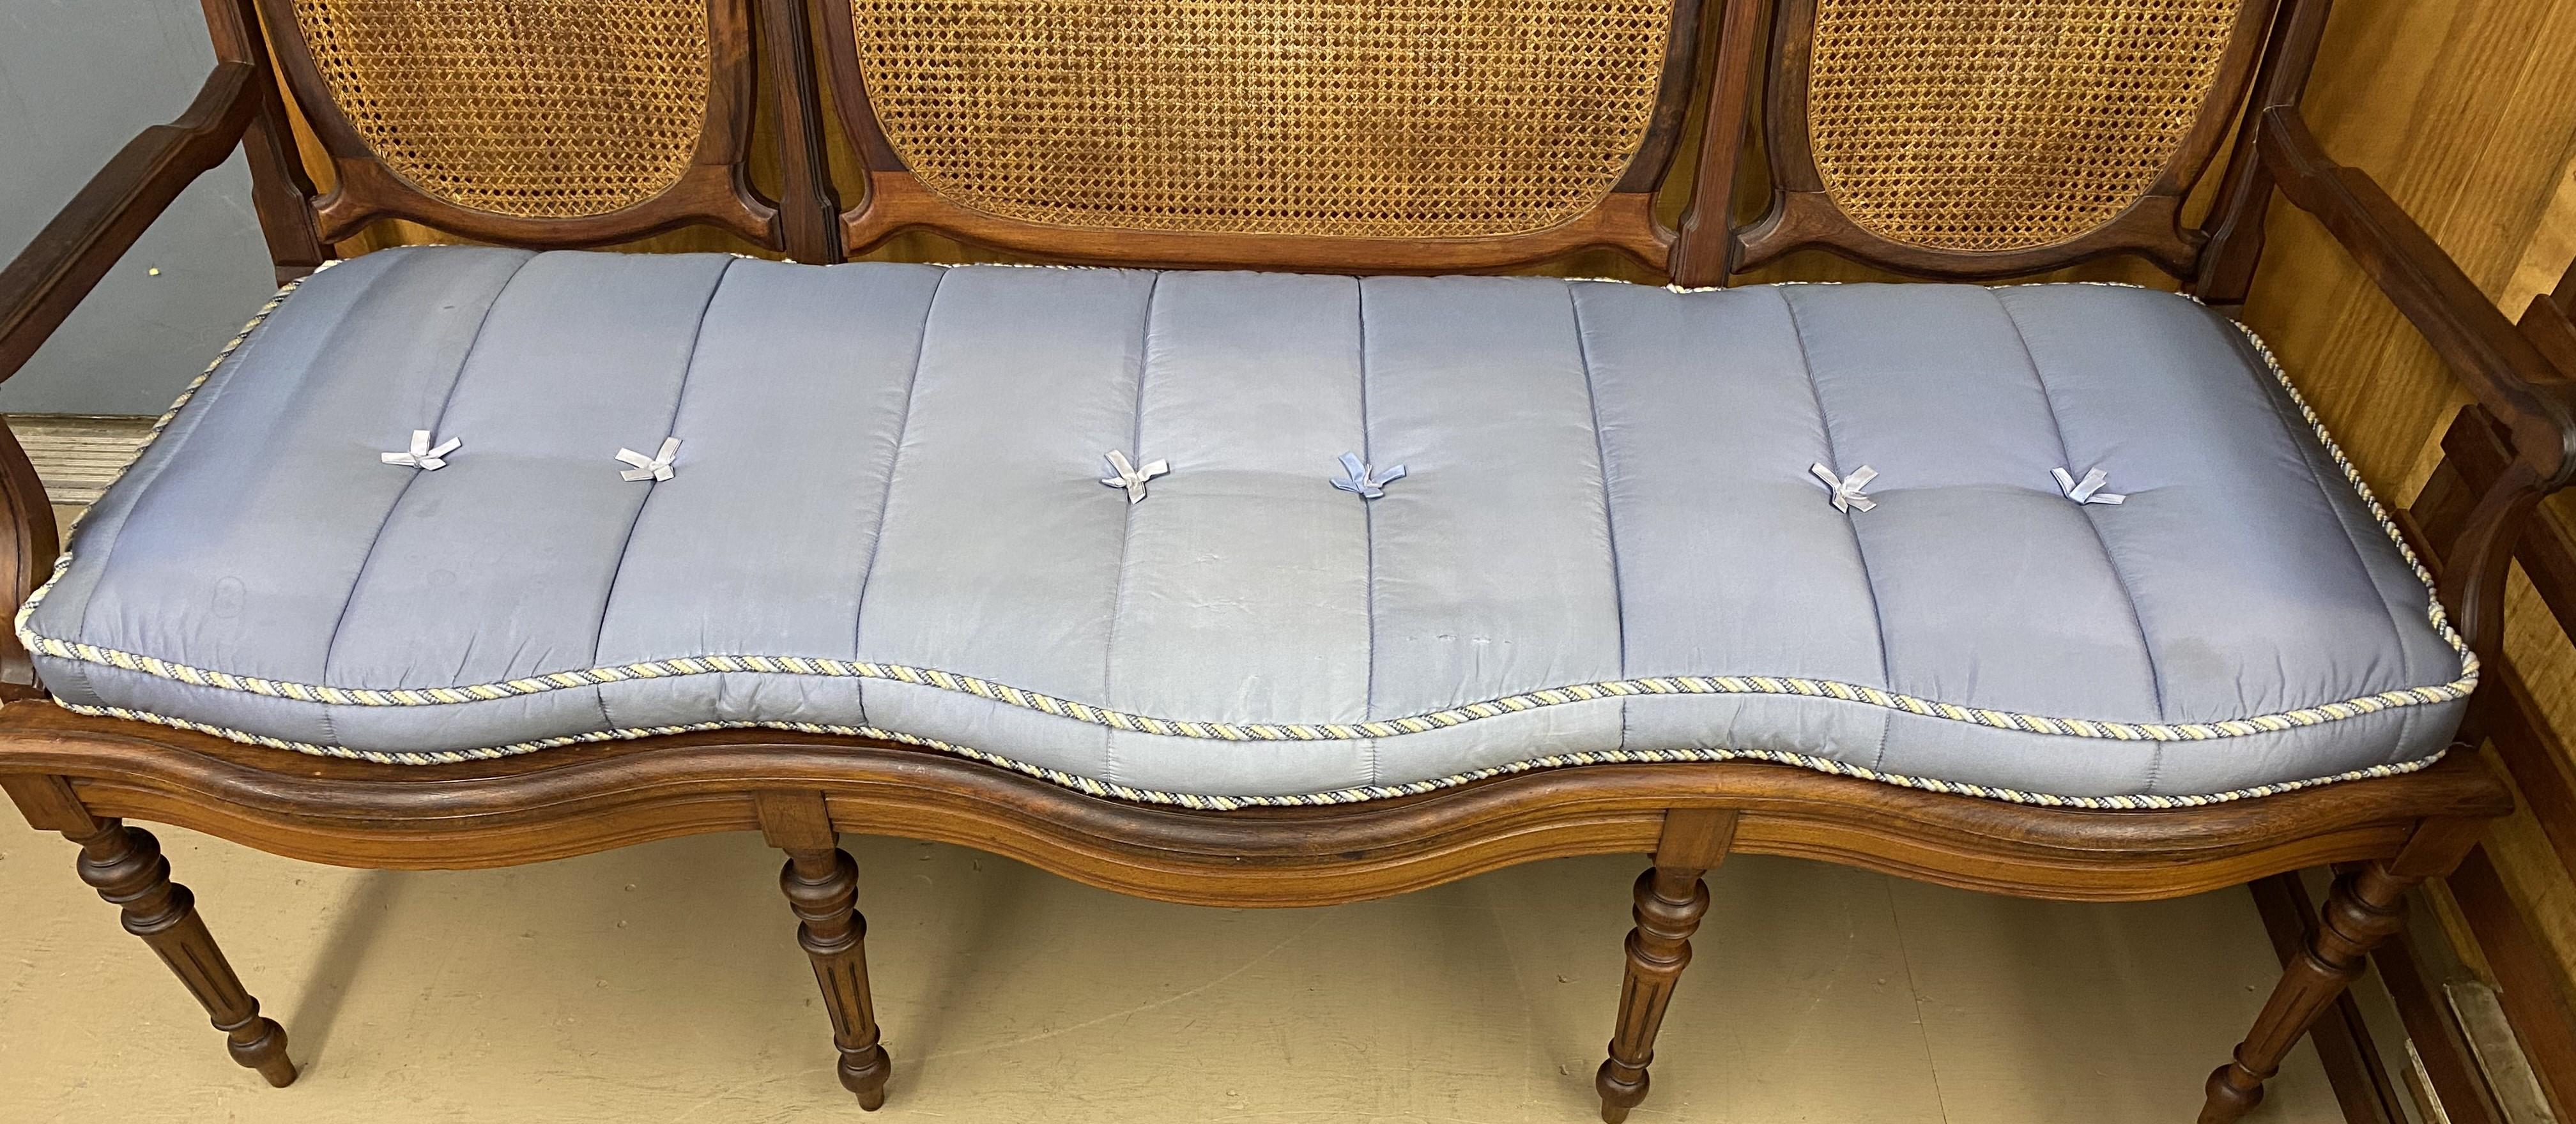 19th c Brazilian Hardwood Settee with Caned Seat and Back For Sale 9